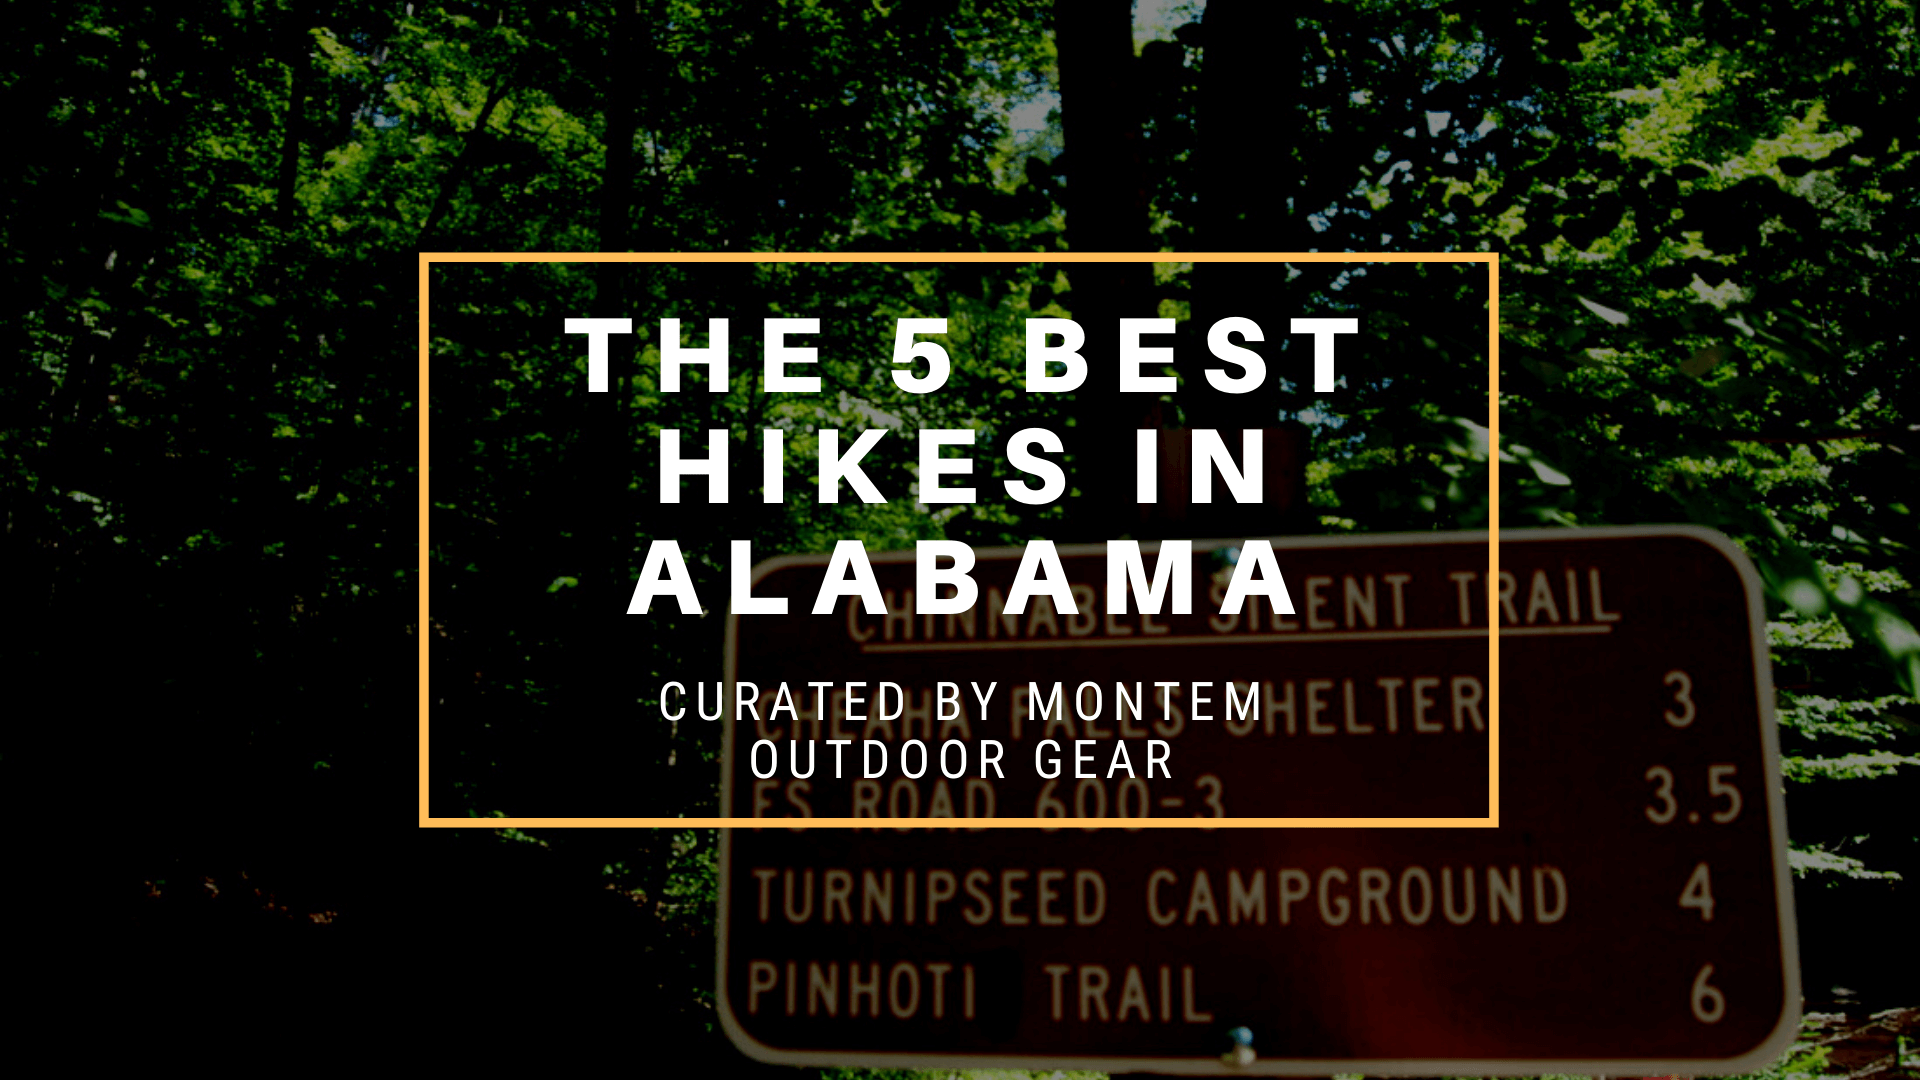 The 5 Best Hikes in Alabama